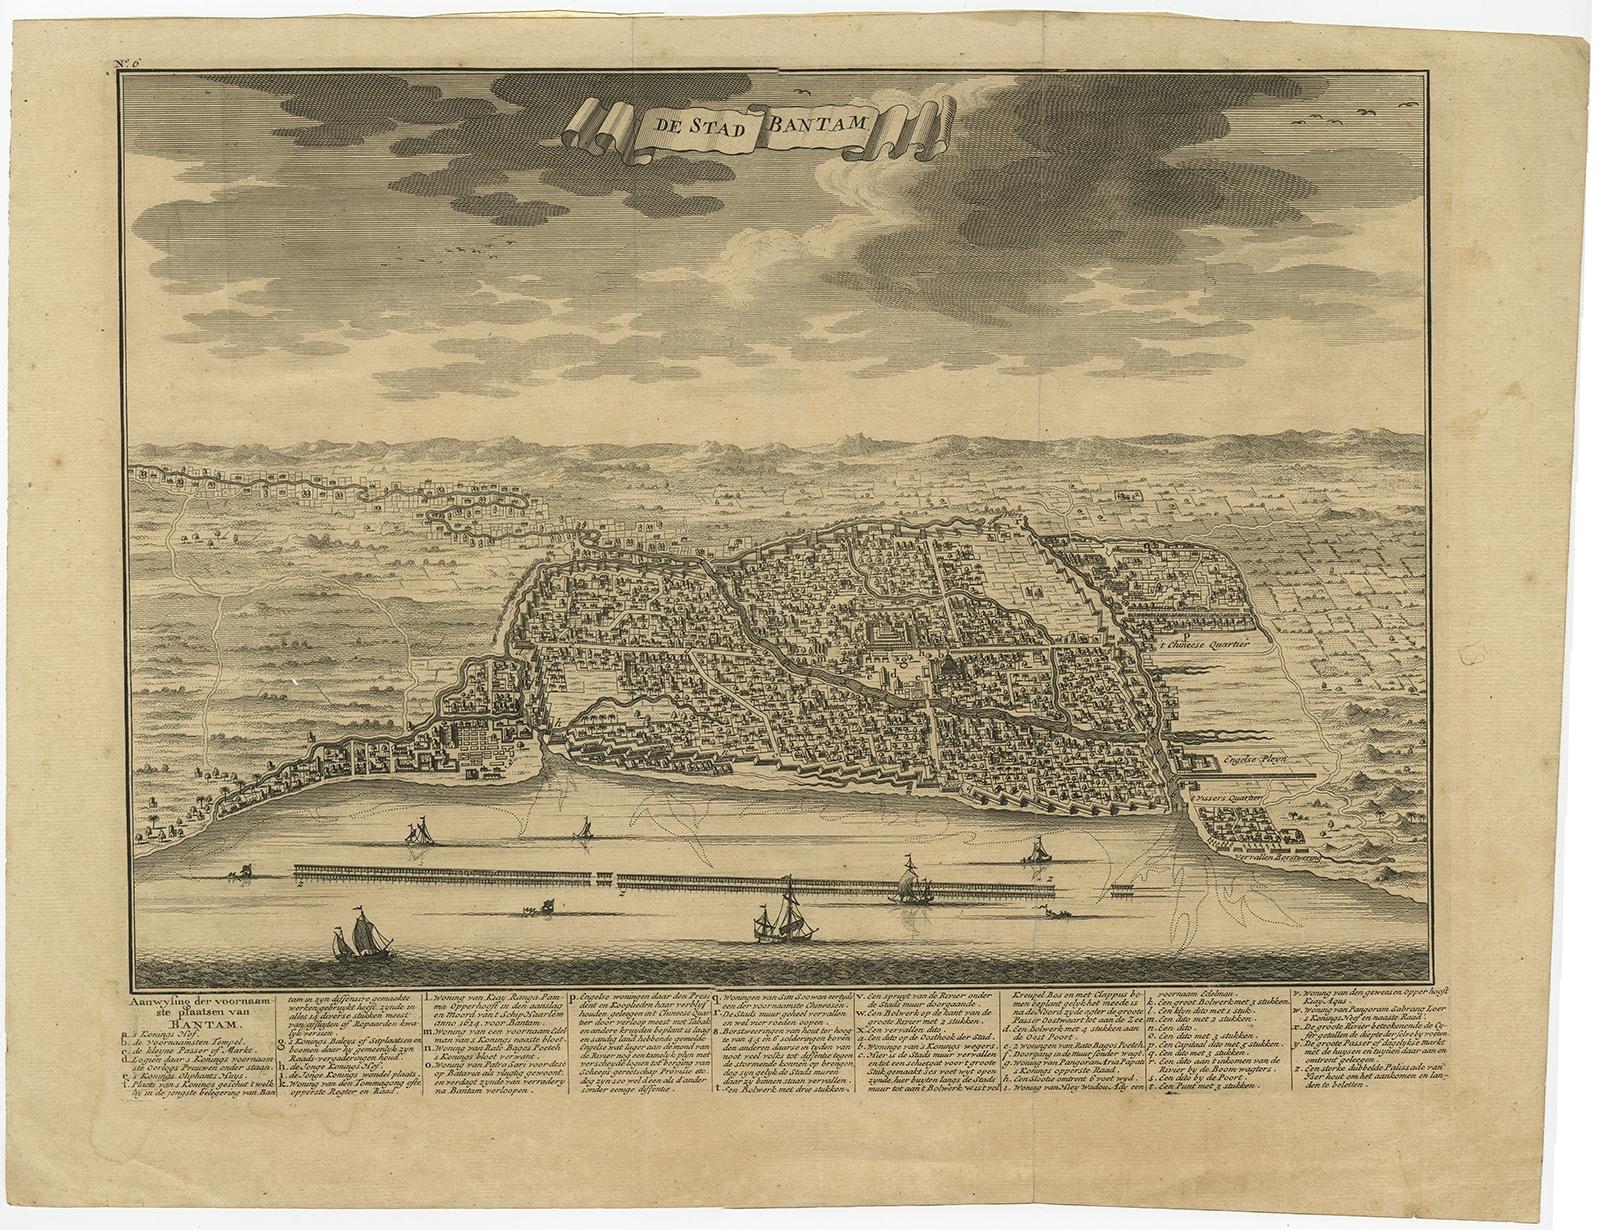 Decorative town-view of the town of Bantam (Banten). In lower margin key a-z to the principal places in town. 

The Banten Sultanate was founded in the 16th century and centred in Banten, a port city on the northwest coast of Java; the